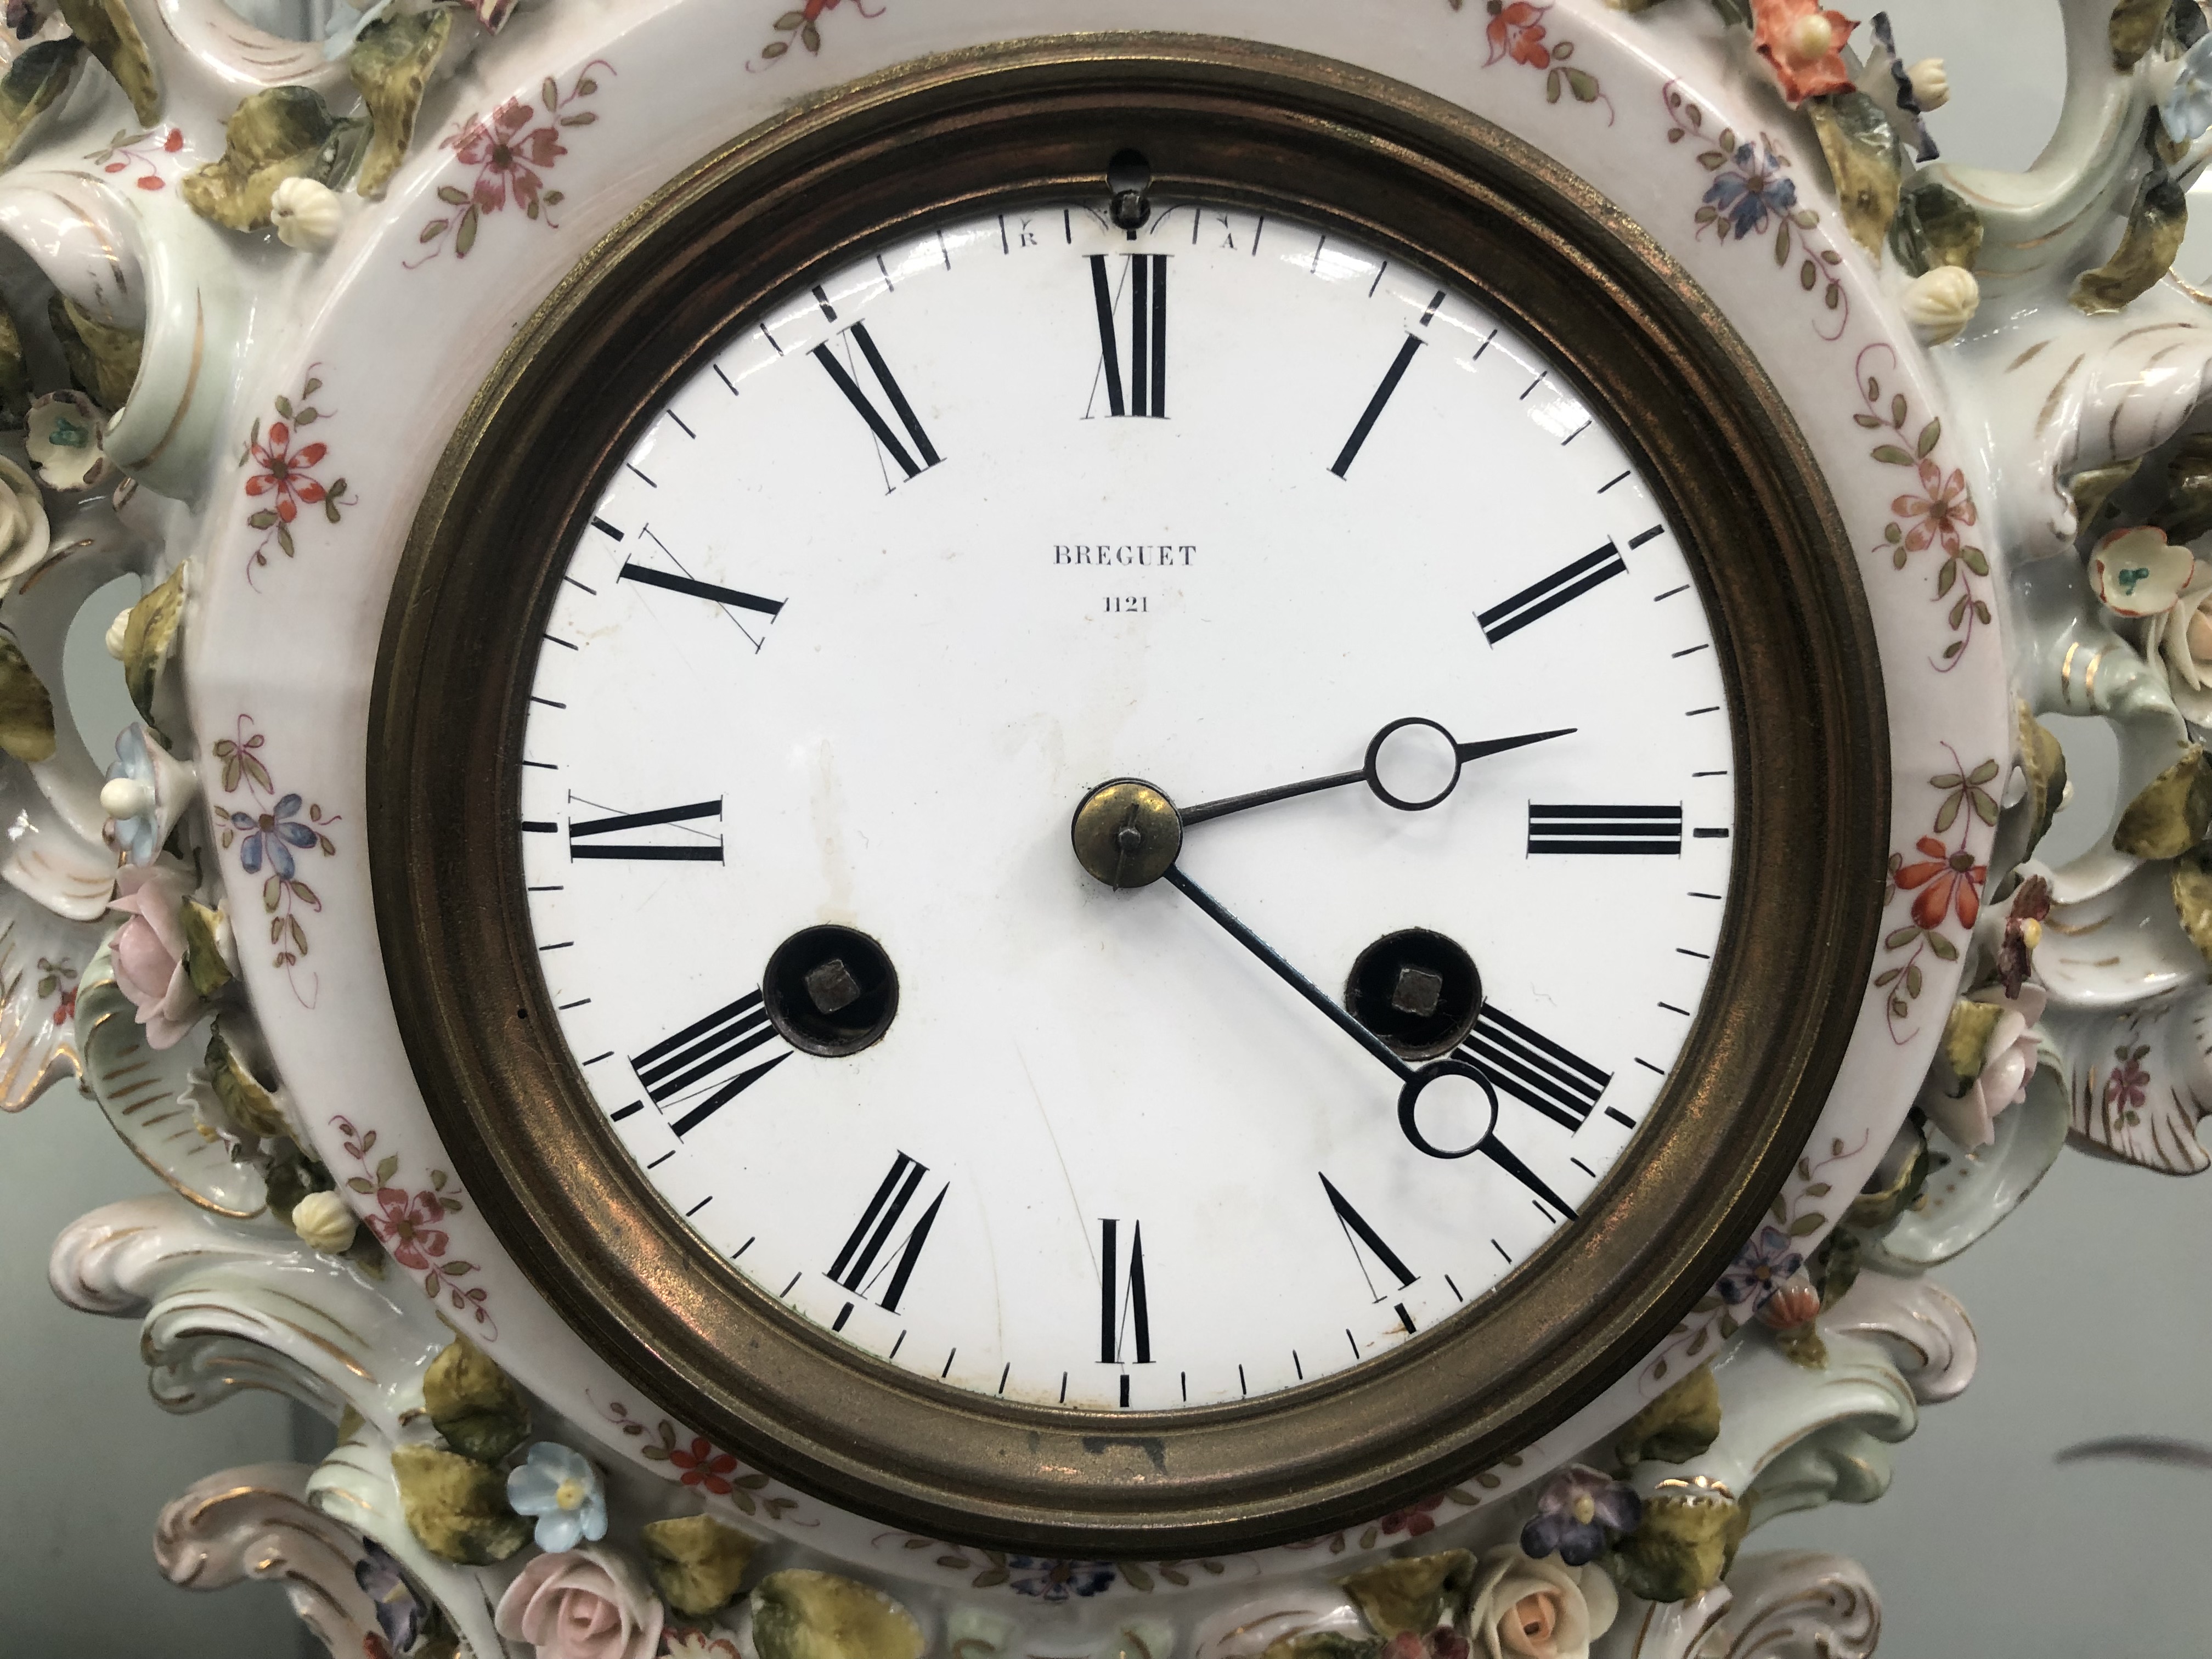 A BREGUET MARKED DIAL TO A CLOCK STRIKING ON A BELL IN A FLOWER ENCRUSTED PORCELAIN CASE - Image 3 of 10